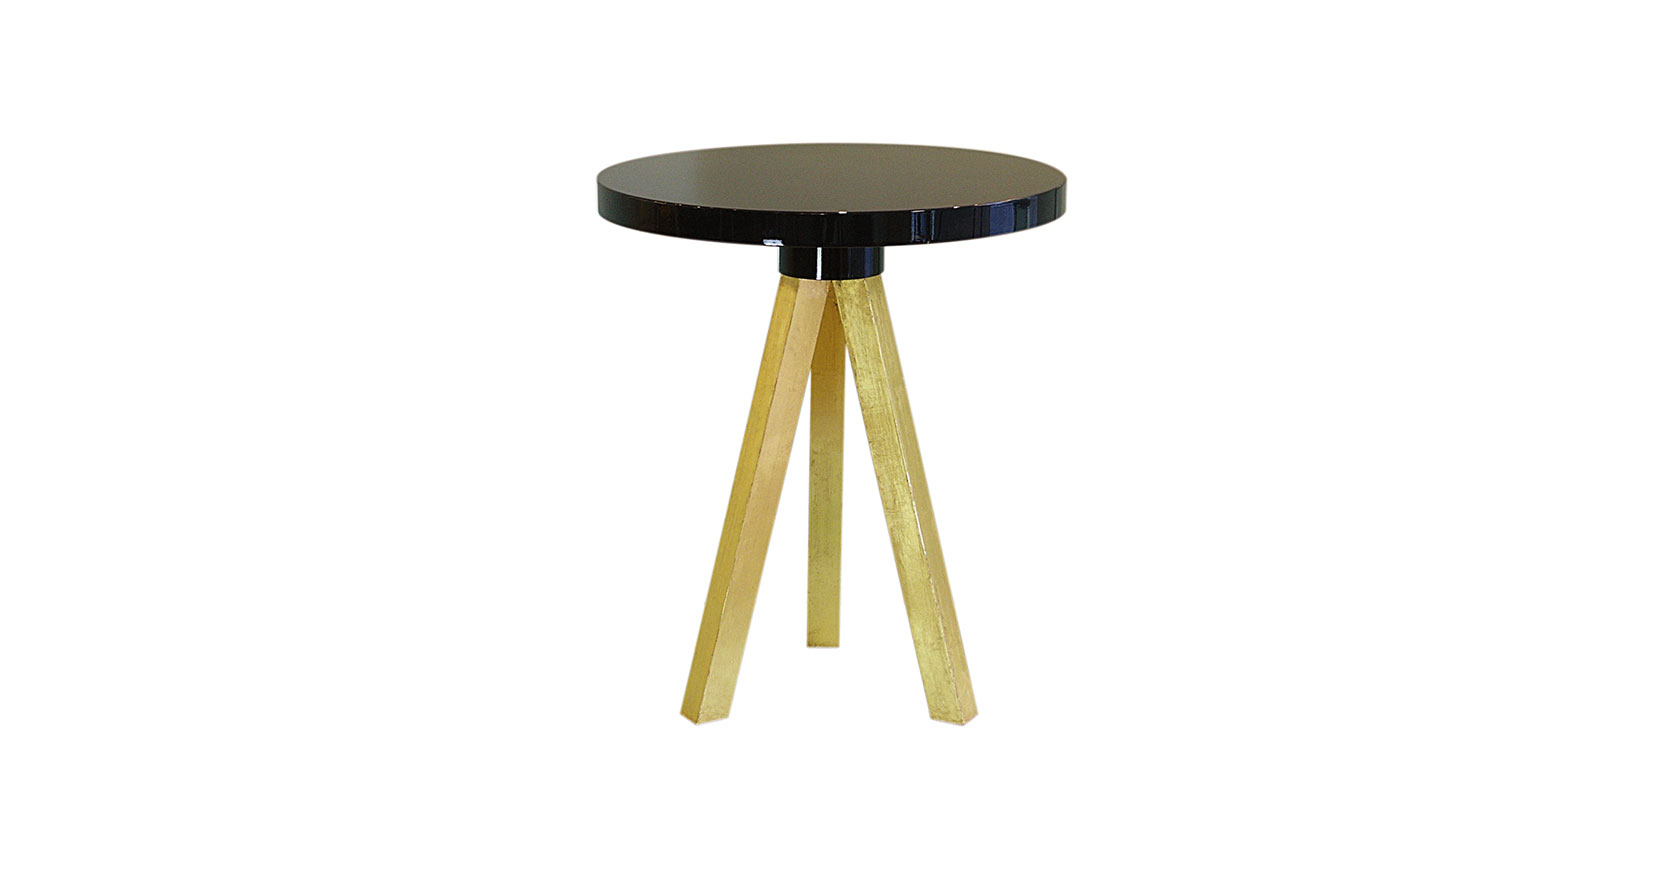 Olivier Gagnère, minimalist tripod pedestal table with 3 gilded wooden legs, dark gray glossy lacquered round top